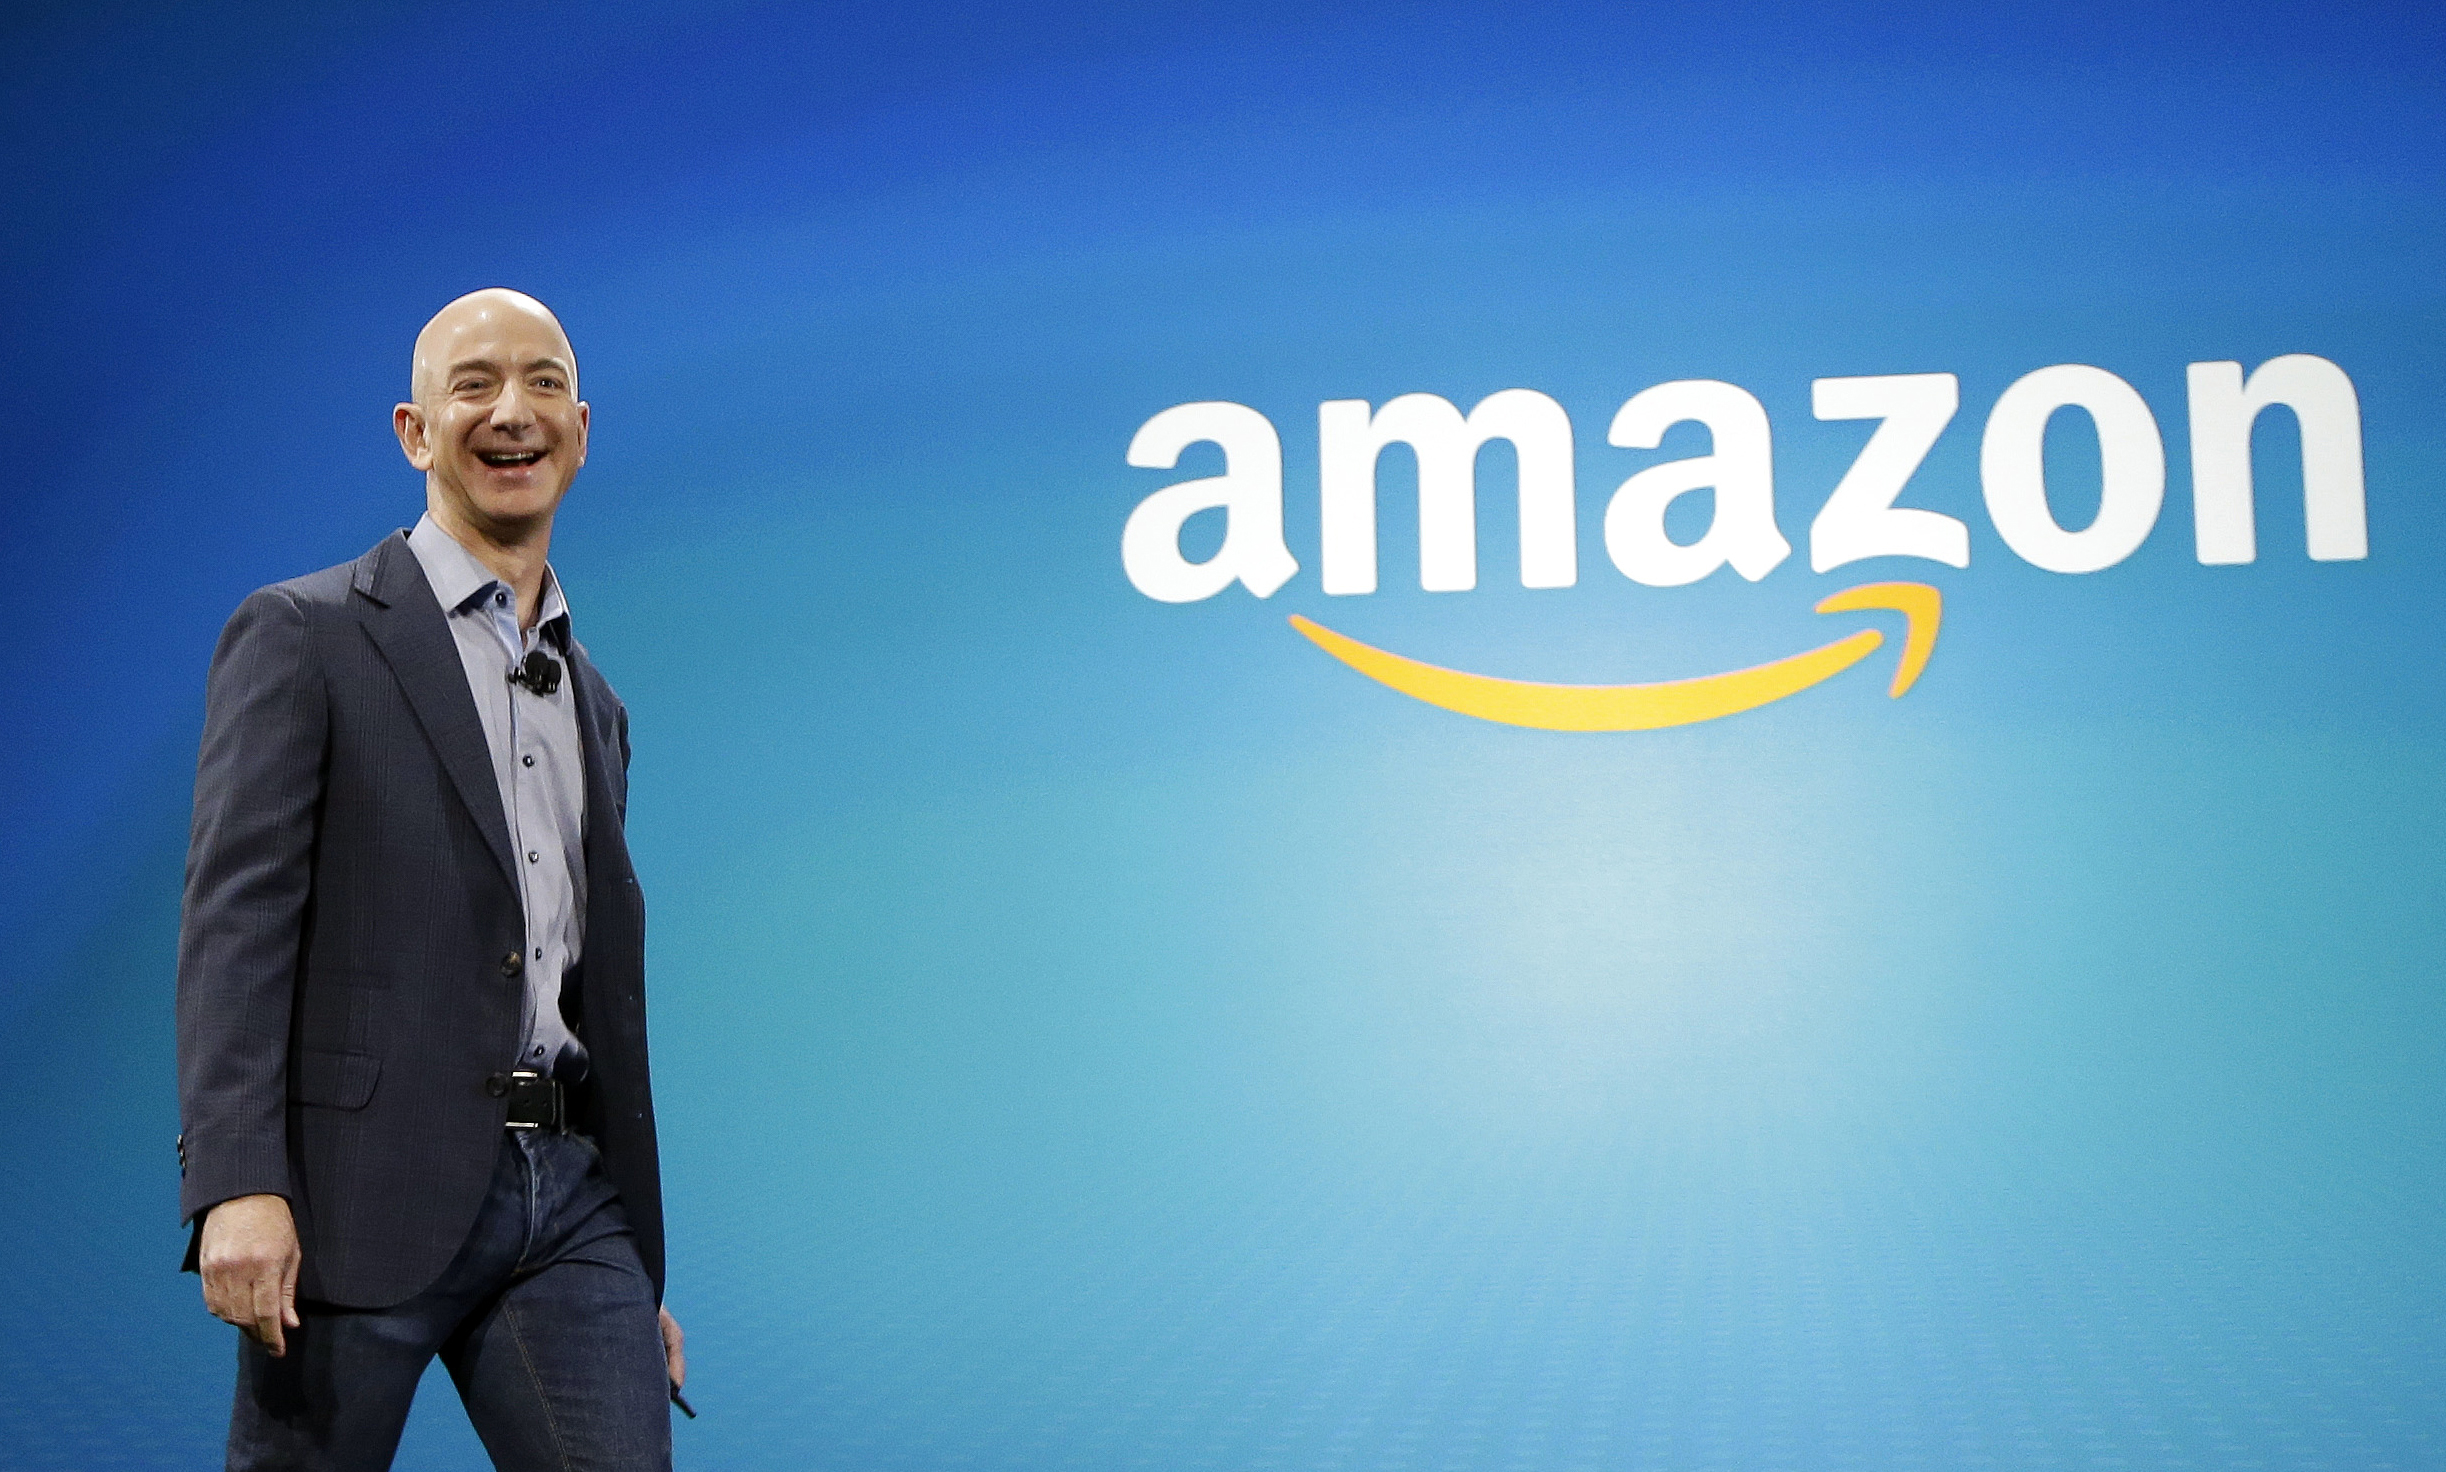 PHOTO: Amazon CEO Jeff Bezos walks onstage for the launch of the new Amazon Fire Phone, in Seattle, June 16, 2014.